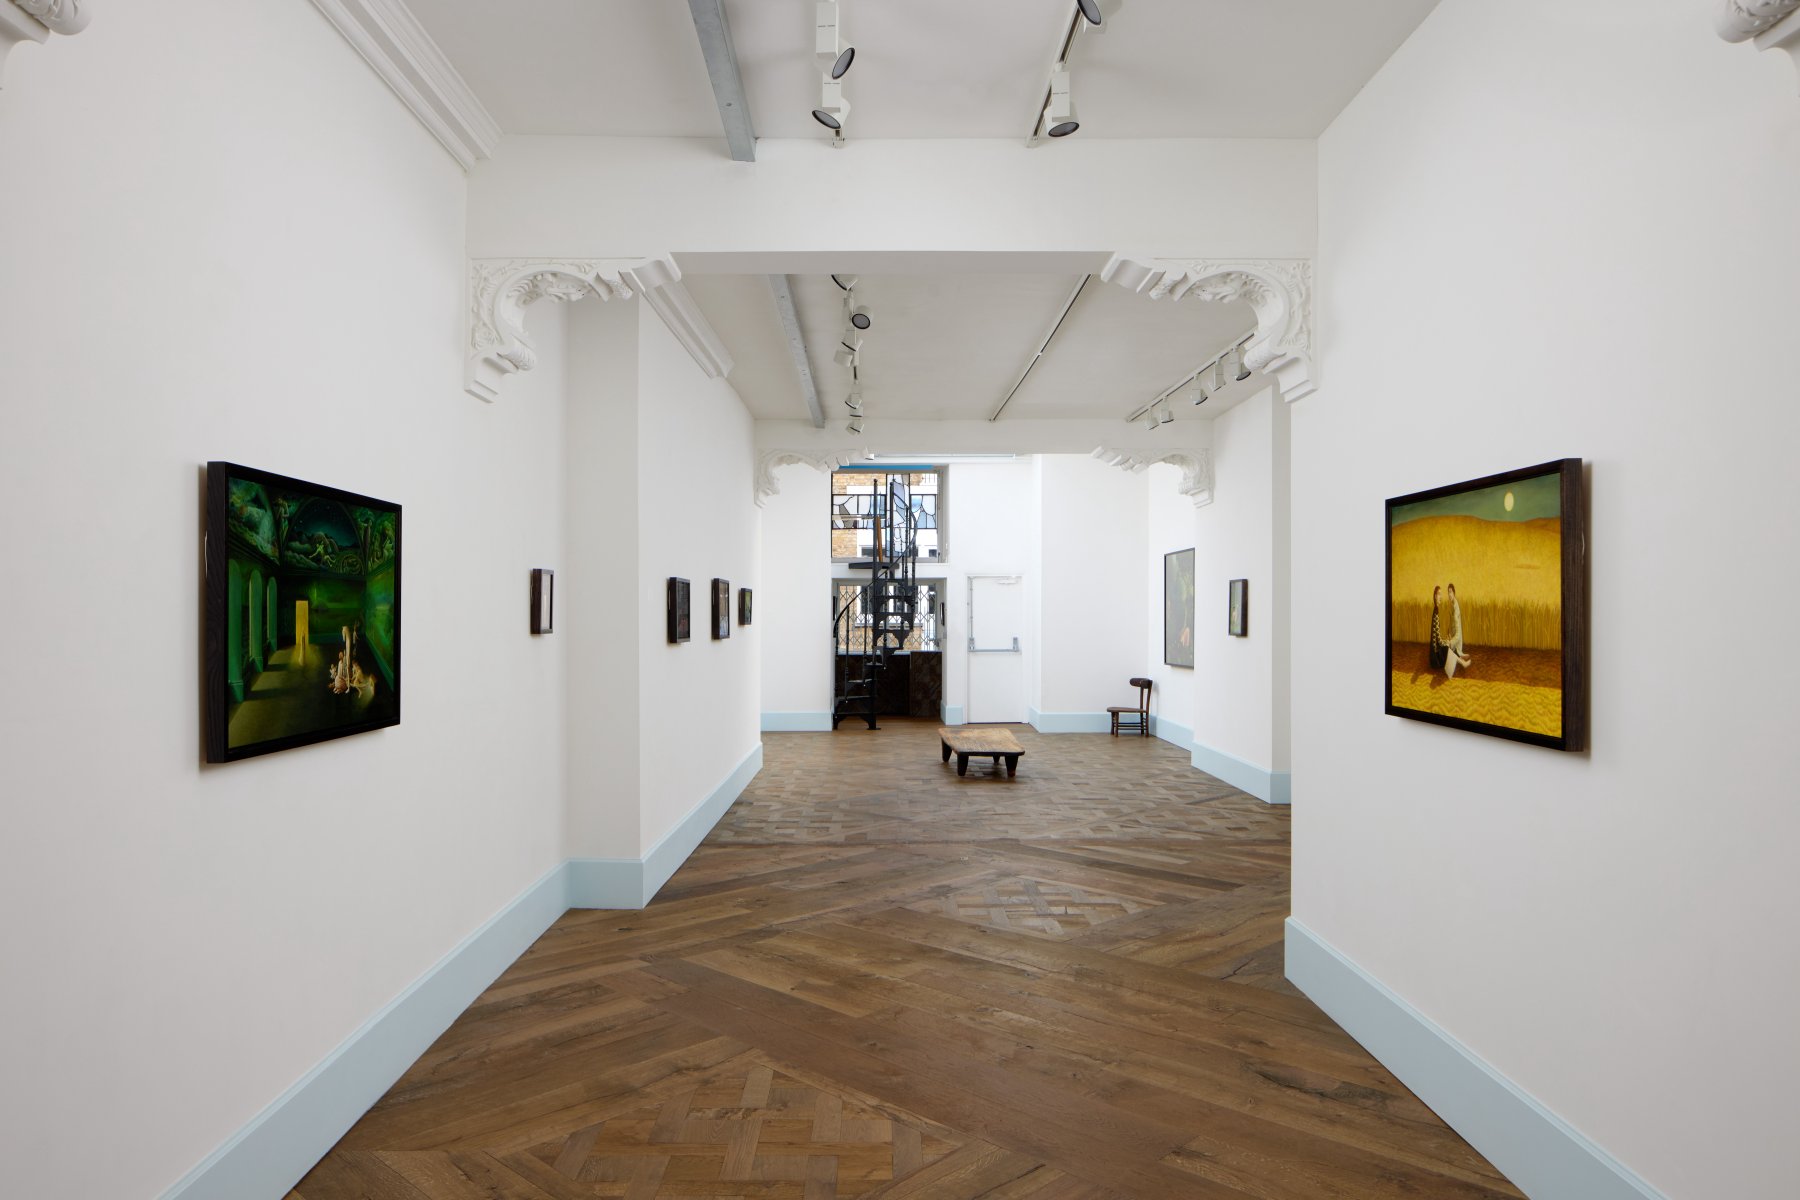 Installation image for Helen Flockhart - In Elysian Fields, at Arusha Gallery